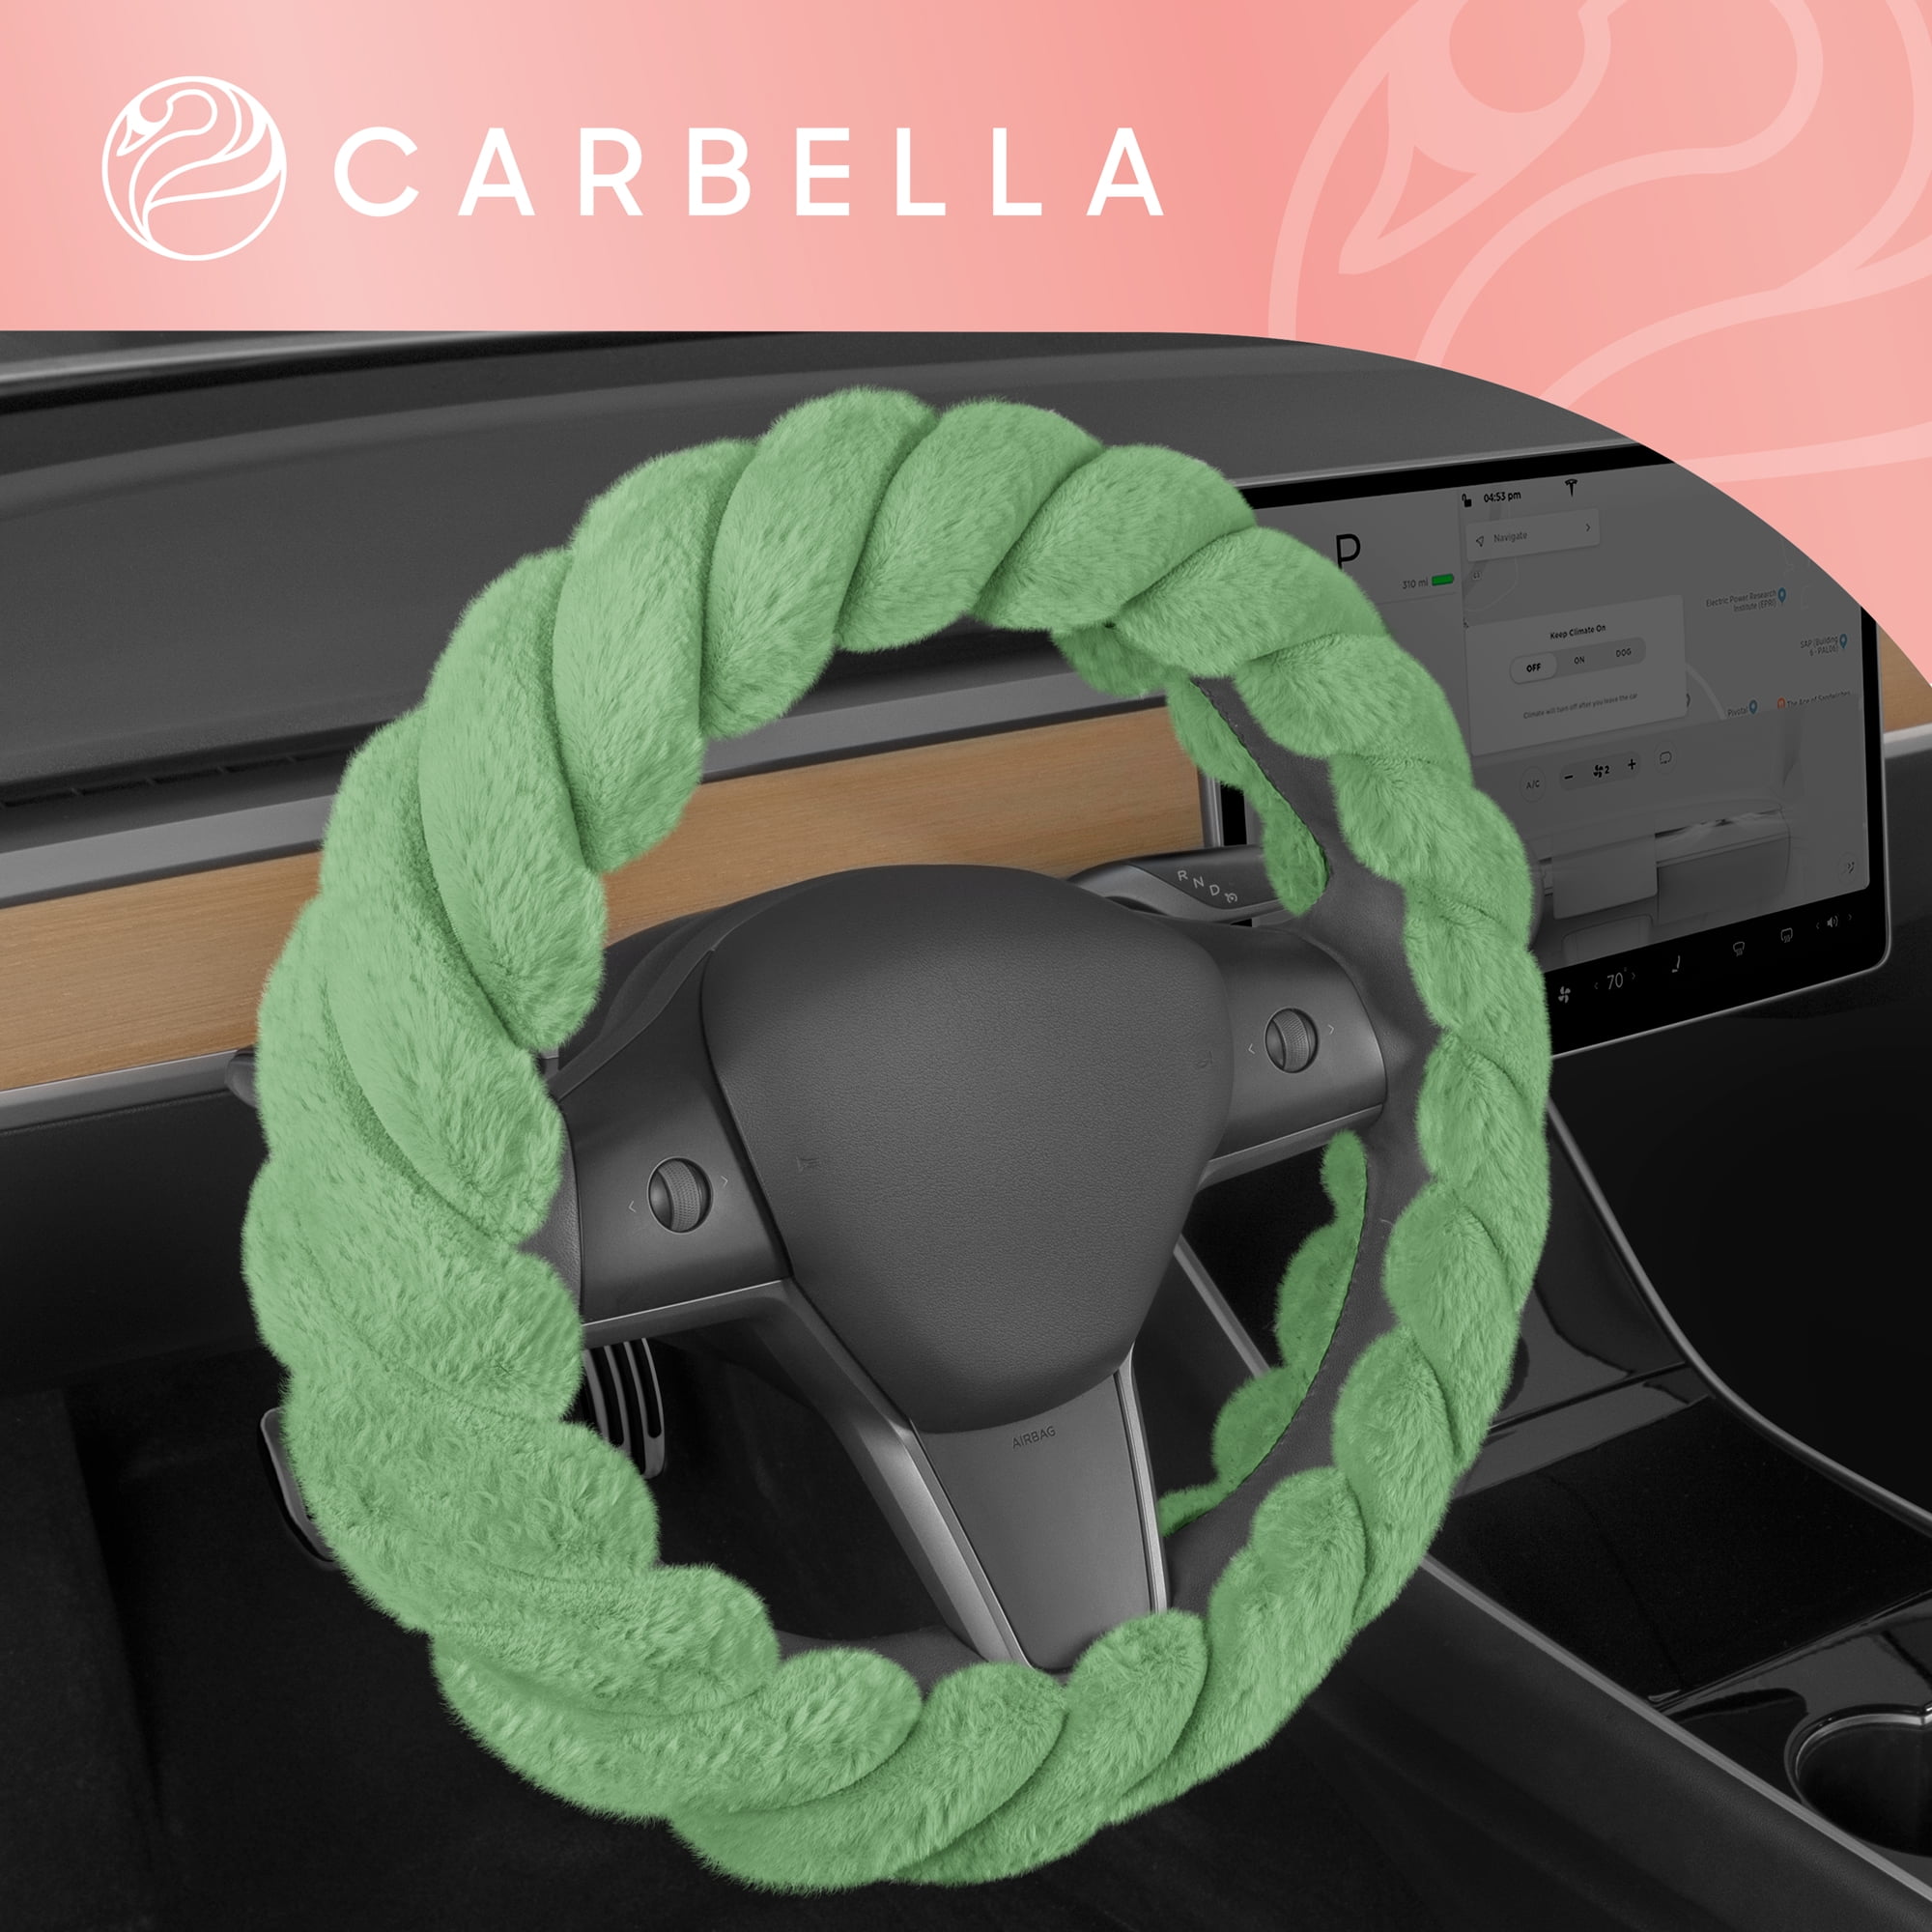 Carbella Twisted Fur Gray Steering Wheel Cover, Standard 15 Inch Size Fits  Most Vehicles, Fuzzy Fluffy Car Steering Cover with Soft Faux Fur Touch 